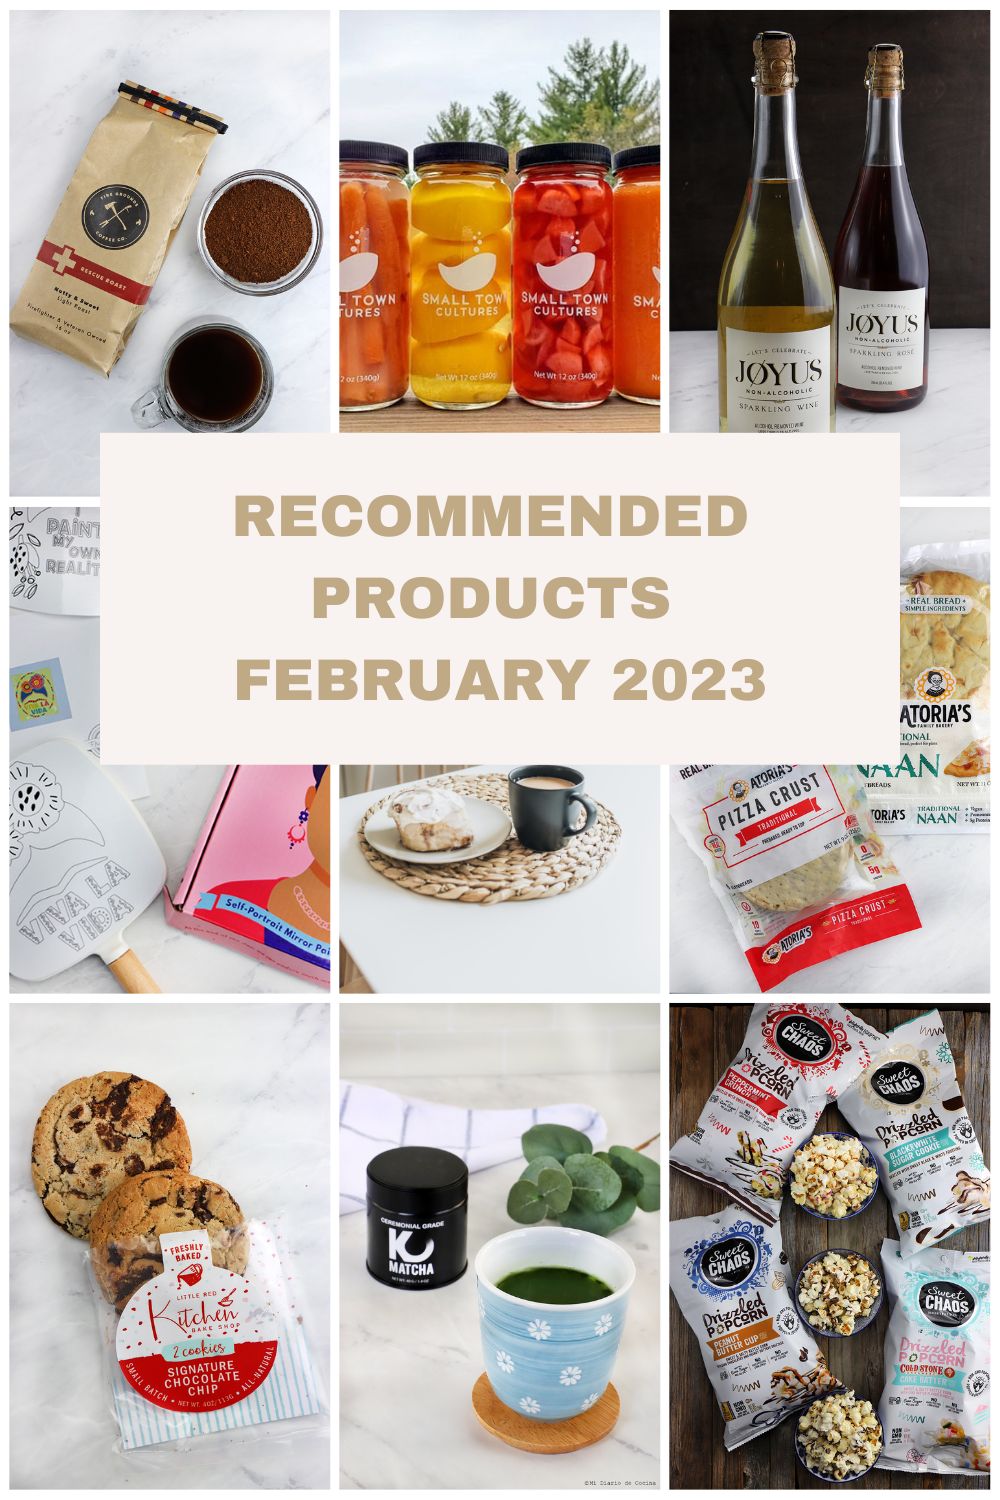 RECOMMENDED PRODUCTS FEBRUARY 2023